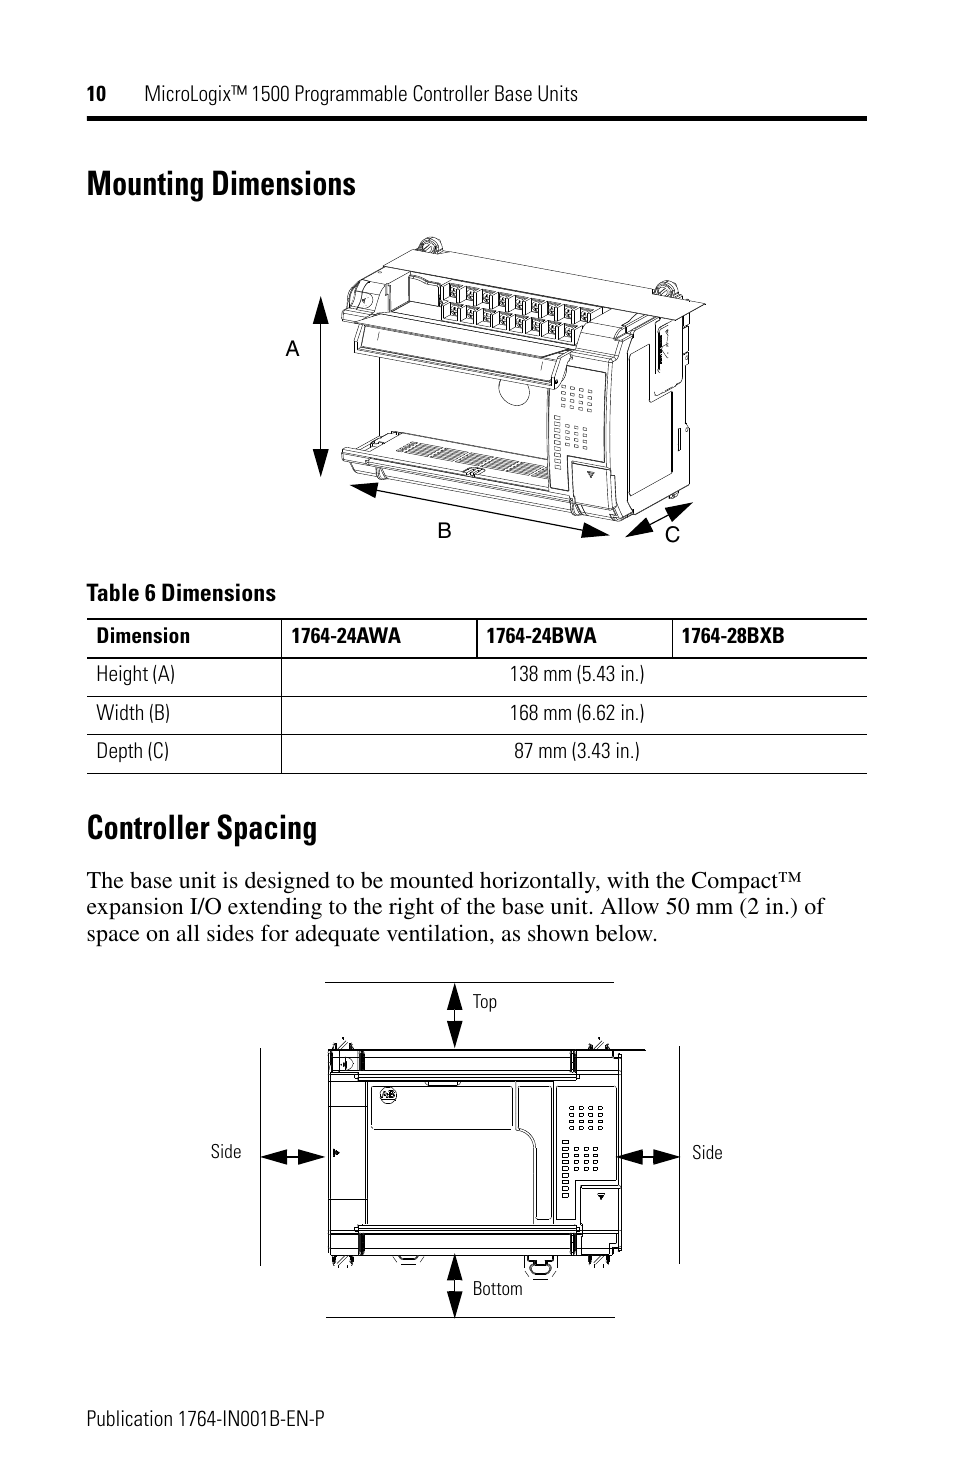 Mounting dimensions controller spacing | Rockwell Automation 1764-28BXB MicroLogix 1500 Programmable Controller Base Units User Manual | Page 10 / 27